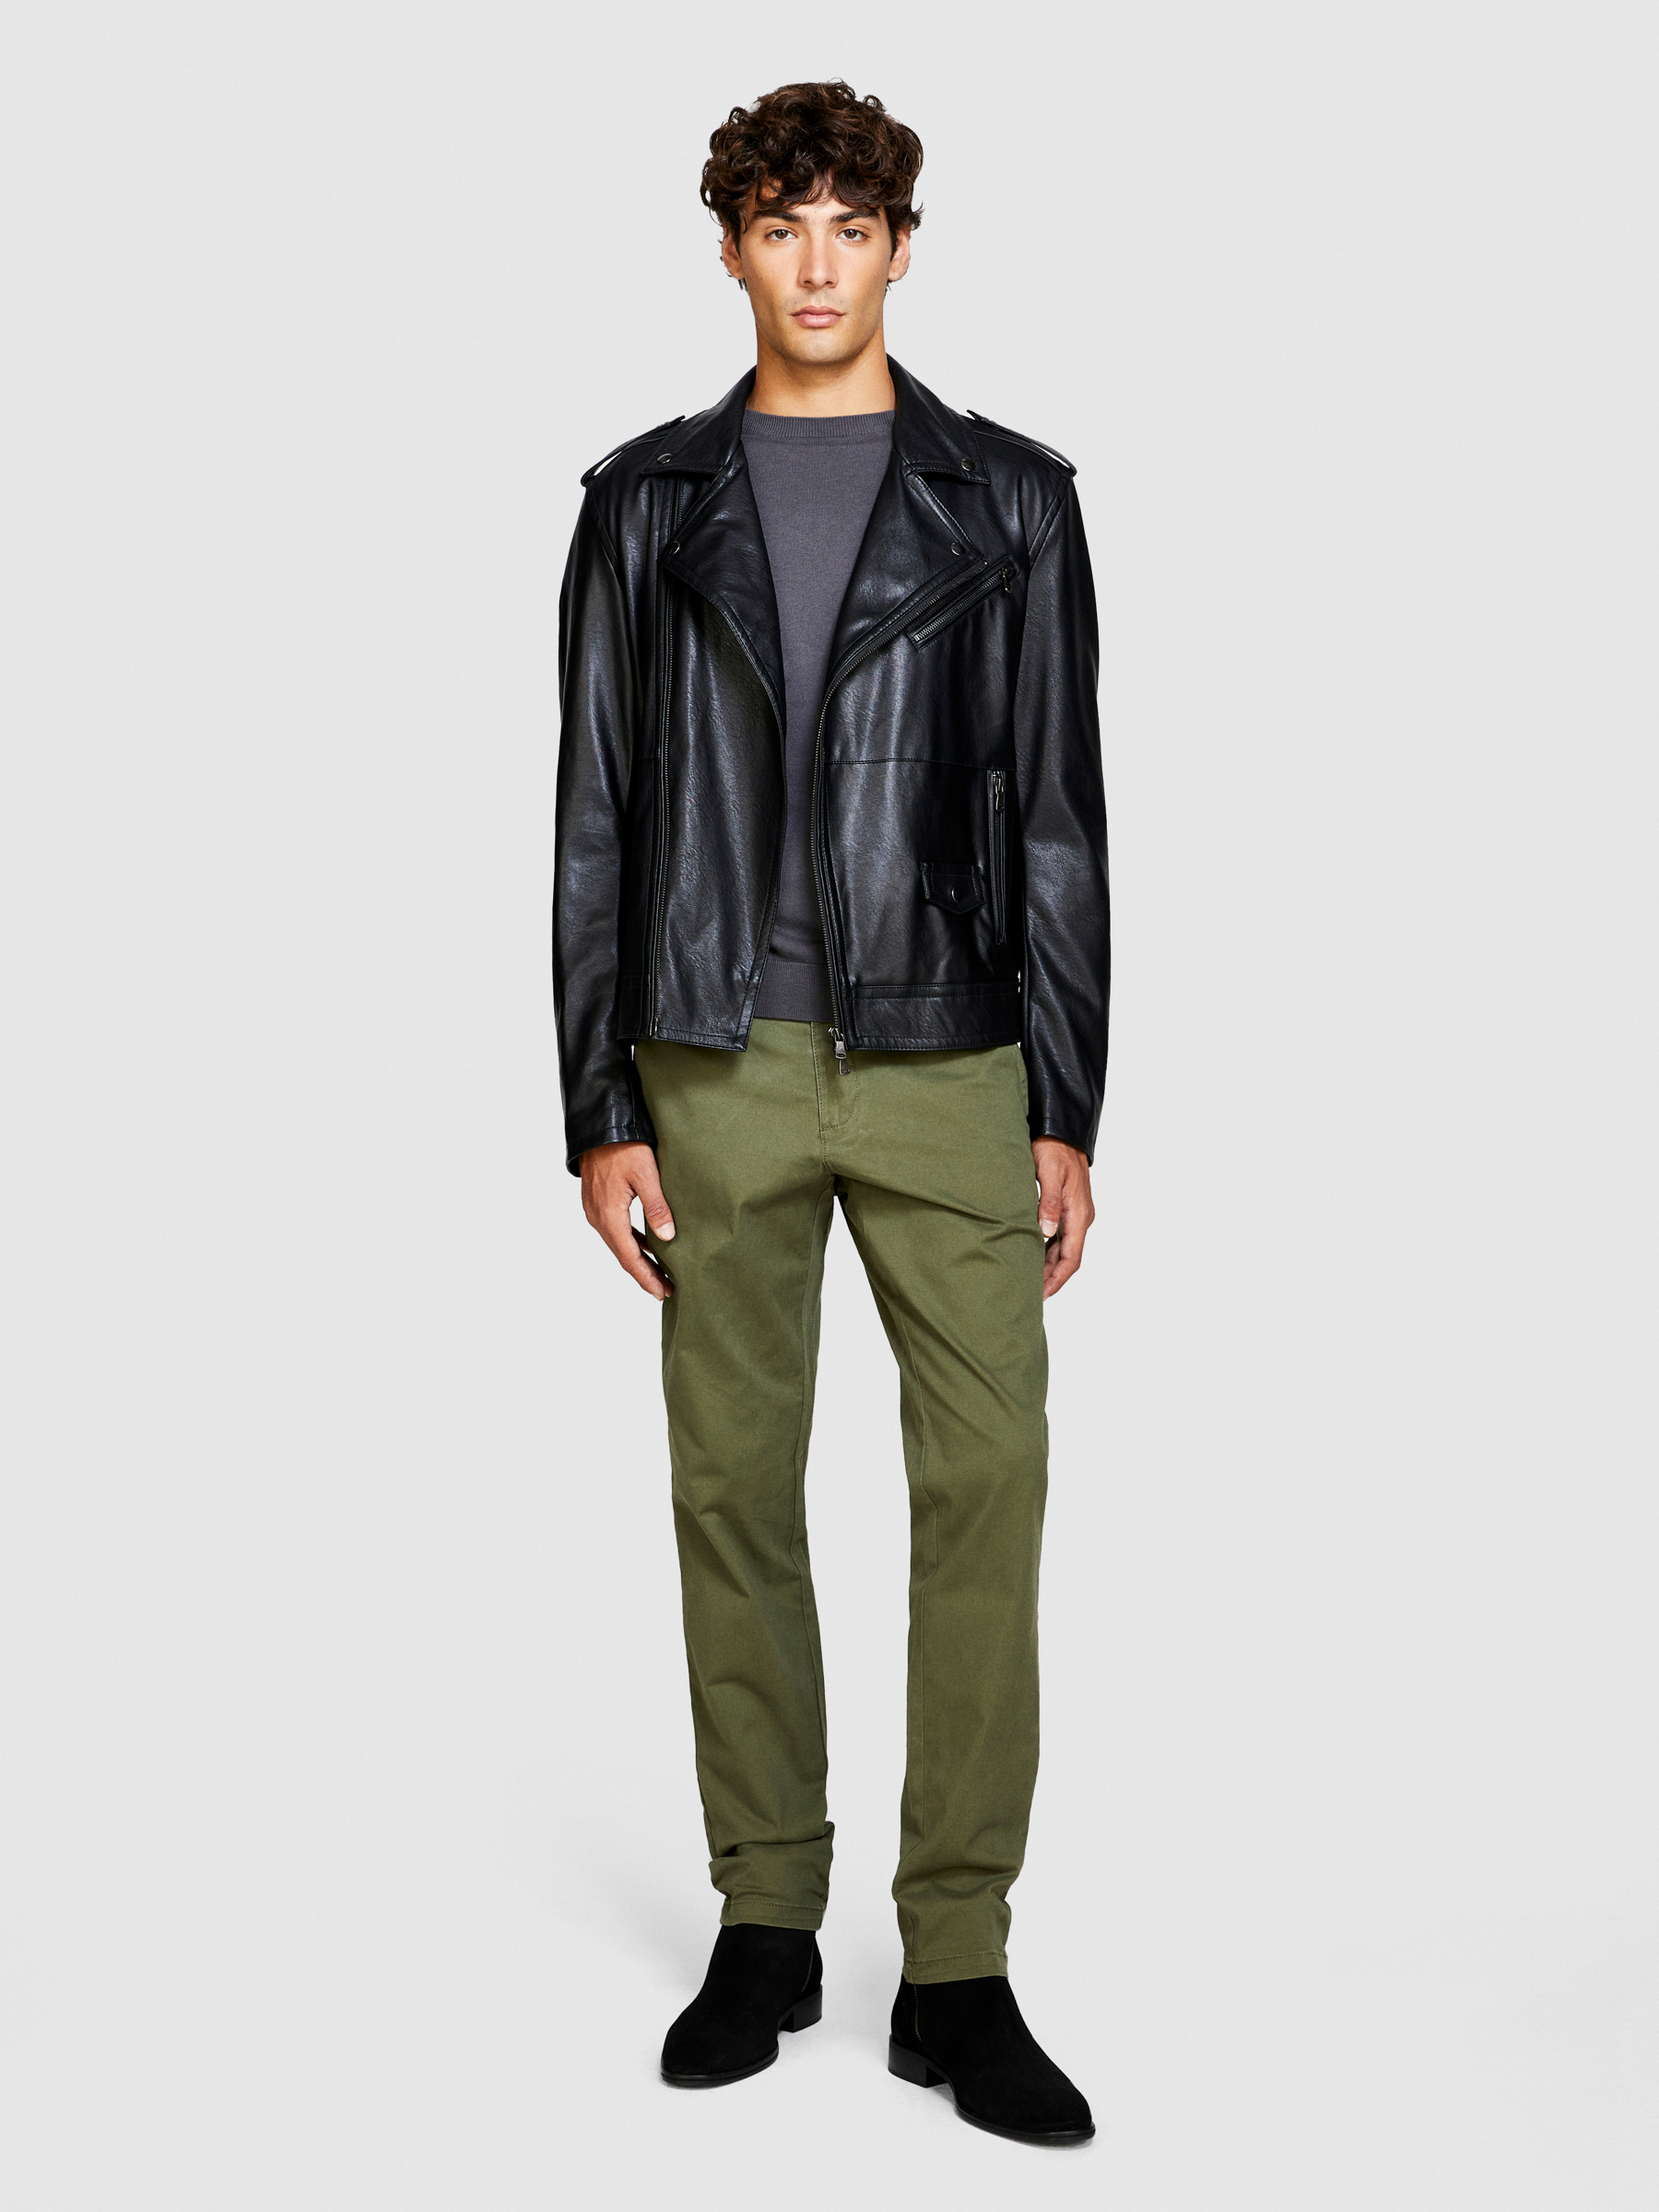 Sisley - Slim Fit Trousers, Man, Military Green, Size: 56